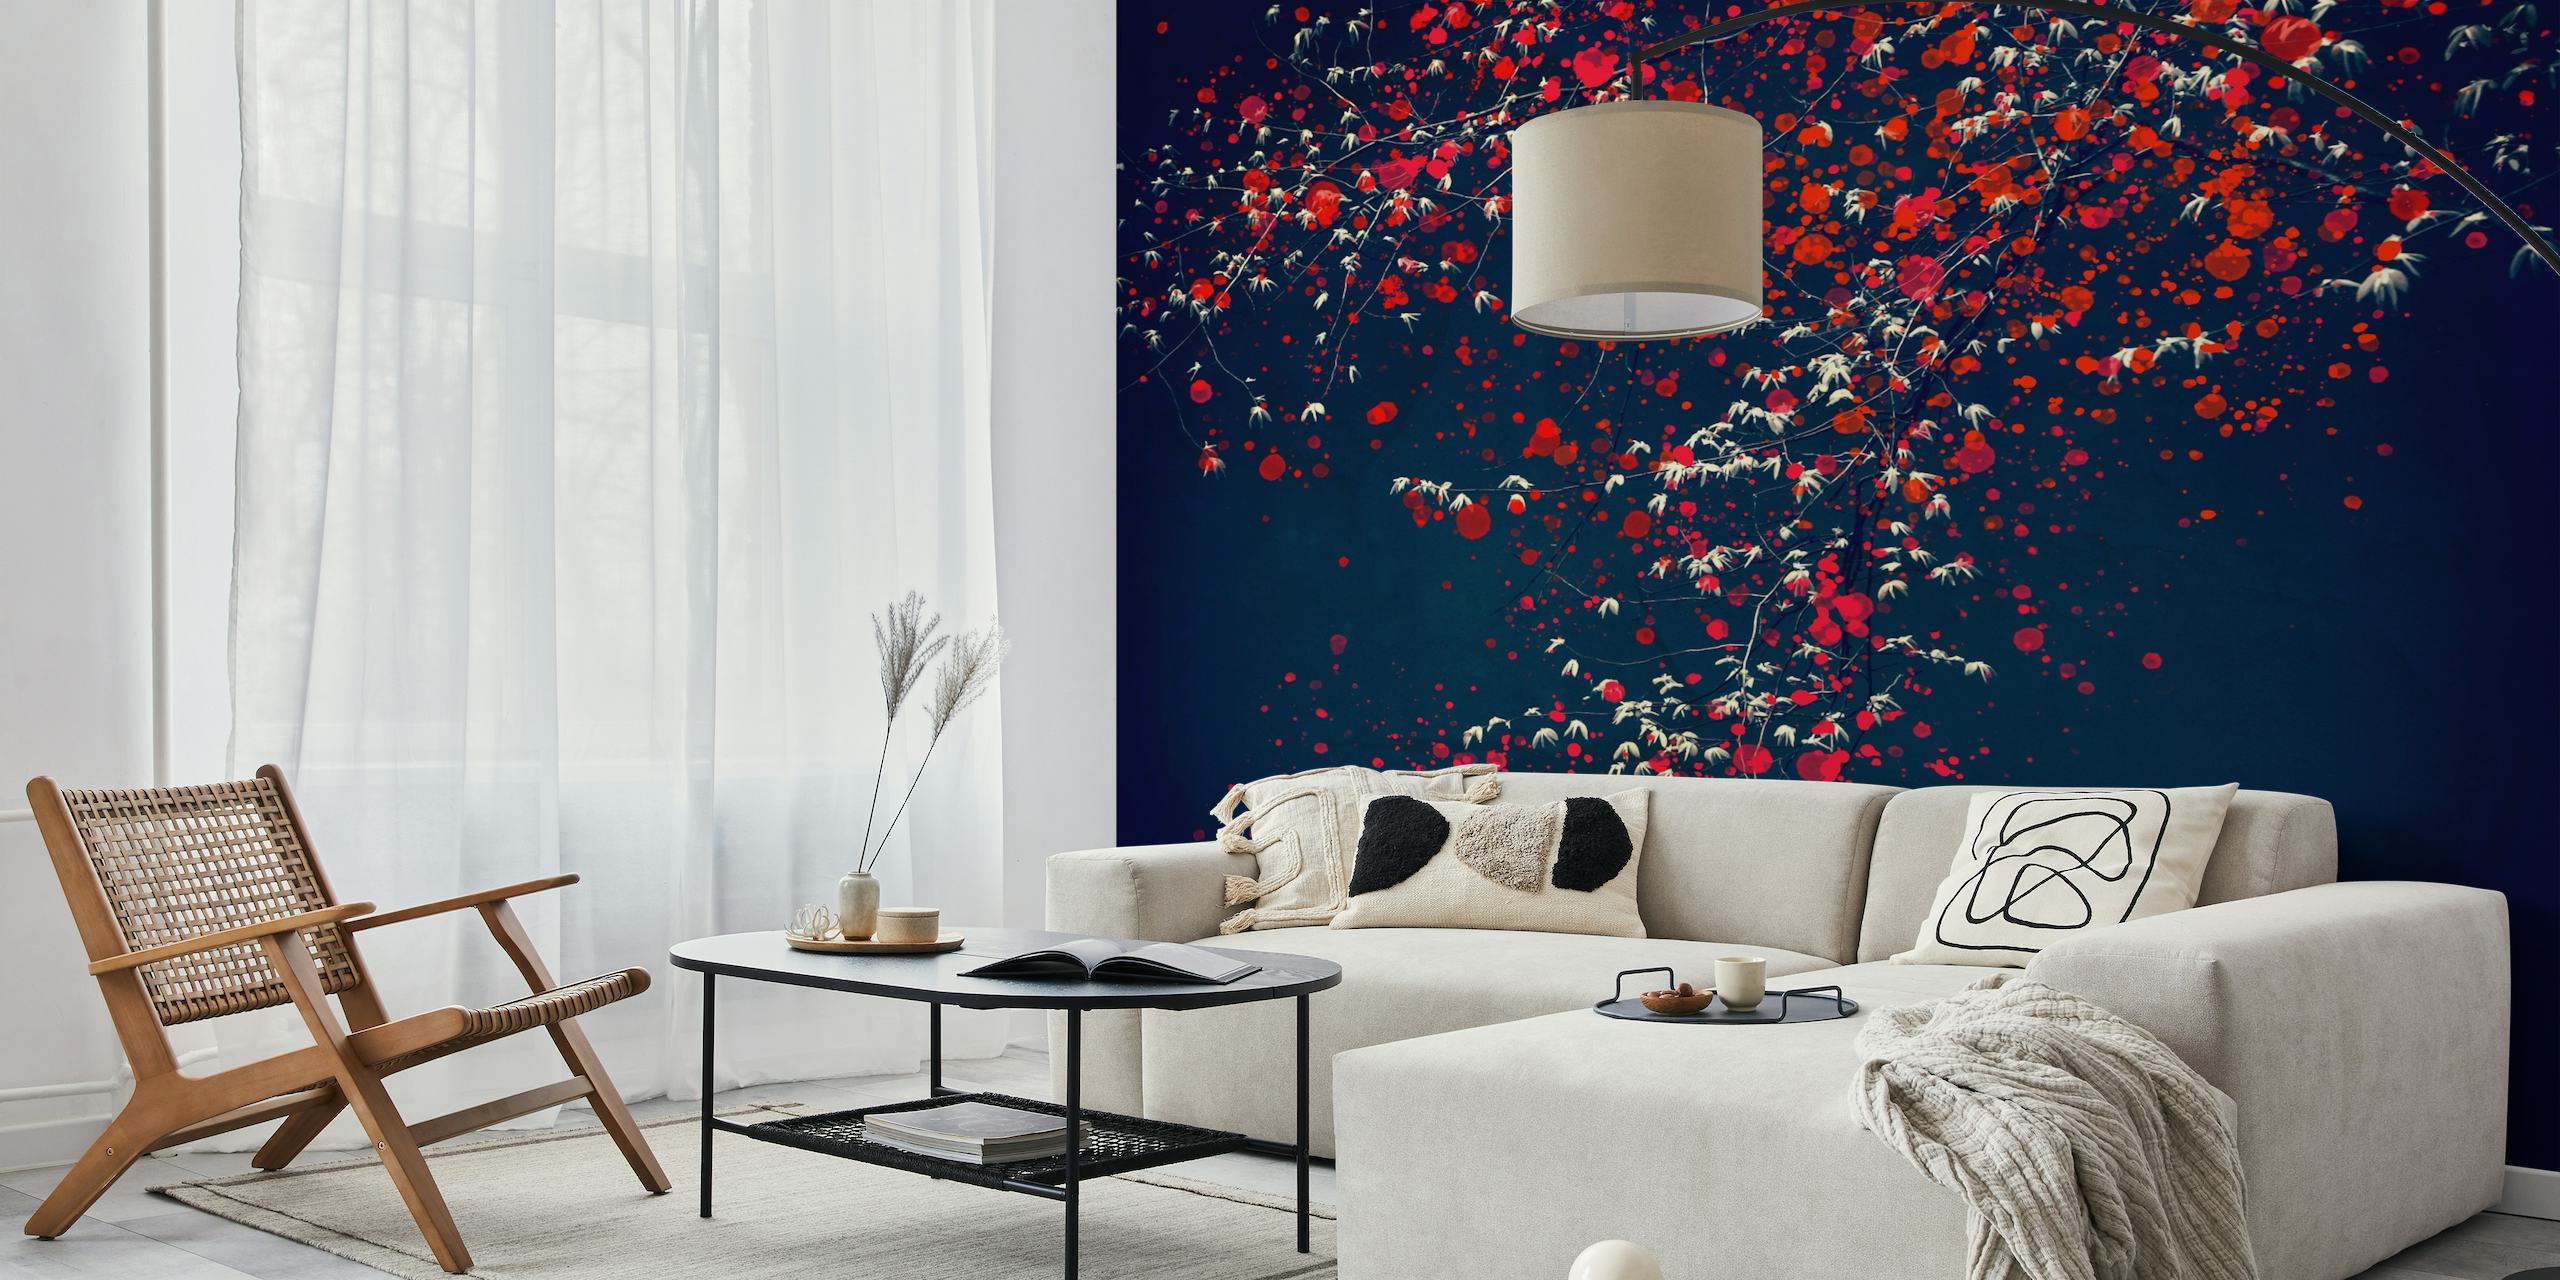 Abstract wall mural of a tree with red and white blossoms against a dark blue background